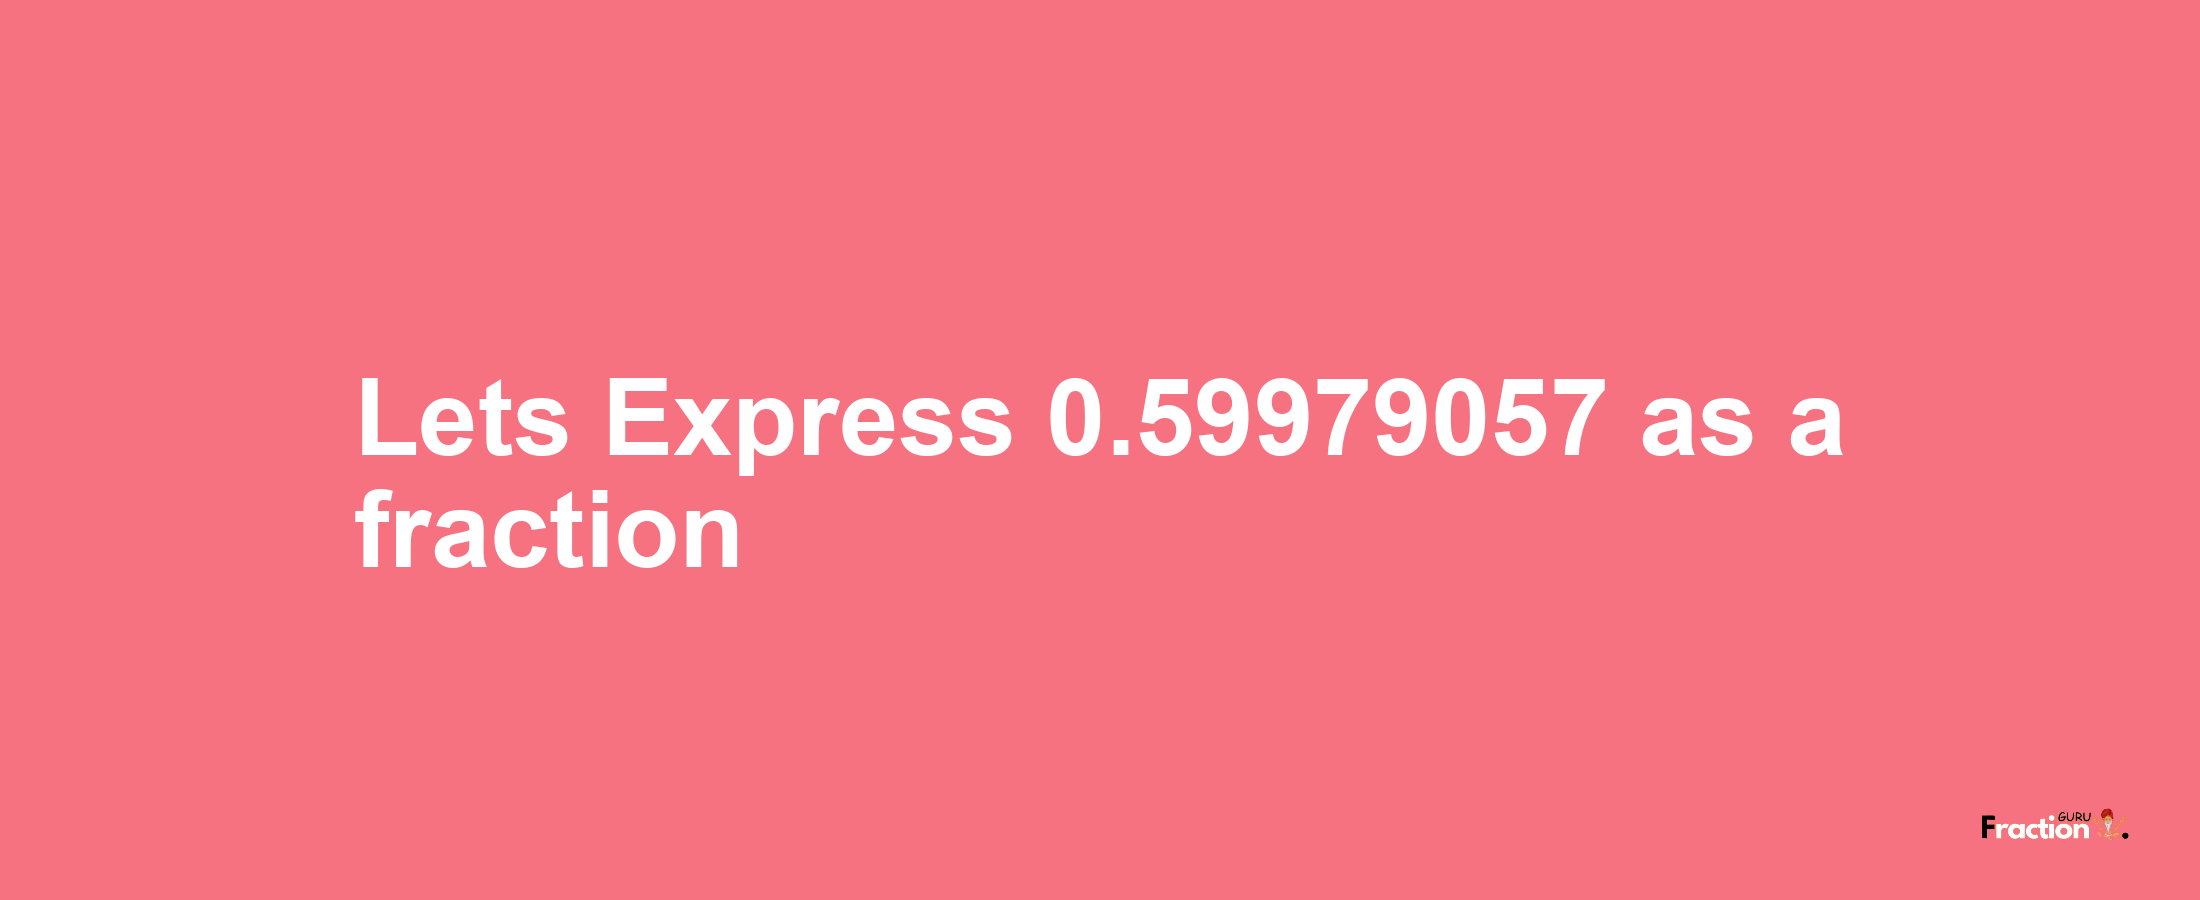 Lets Express 0.59979057 as afraction